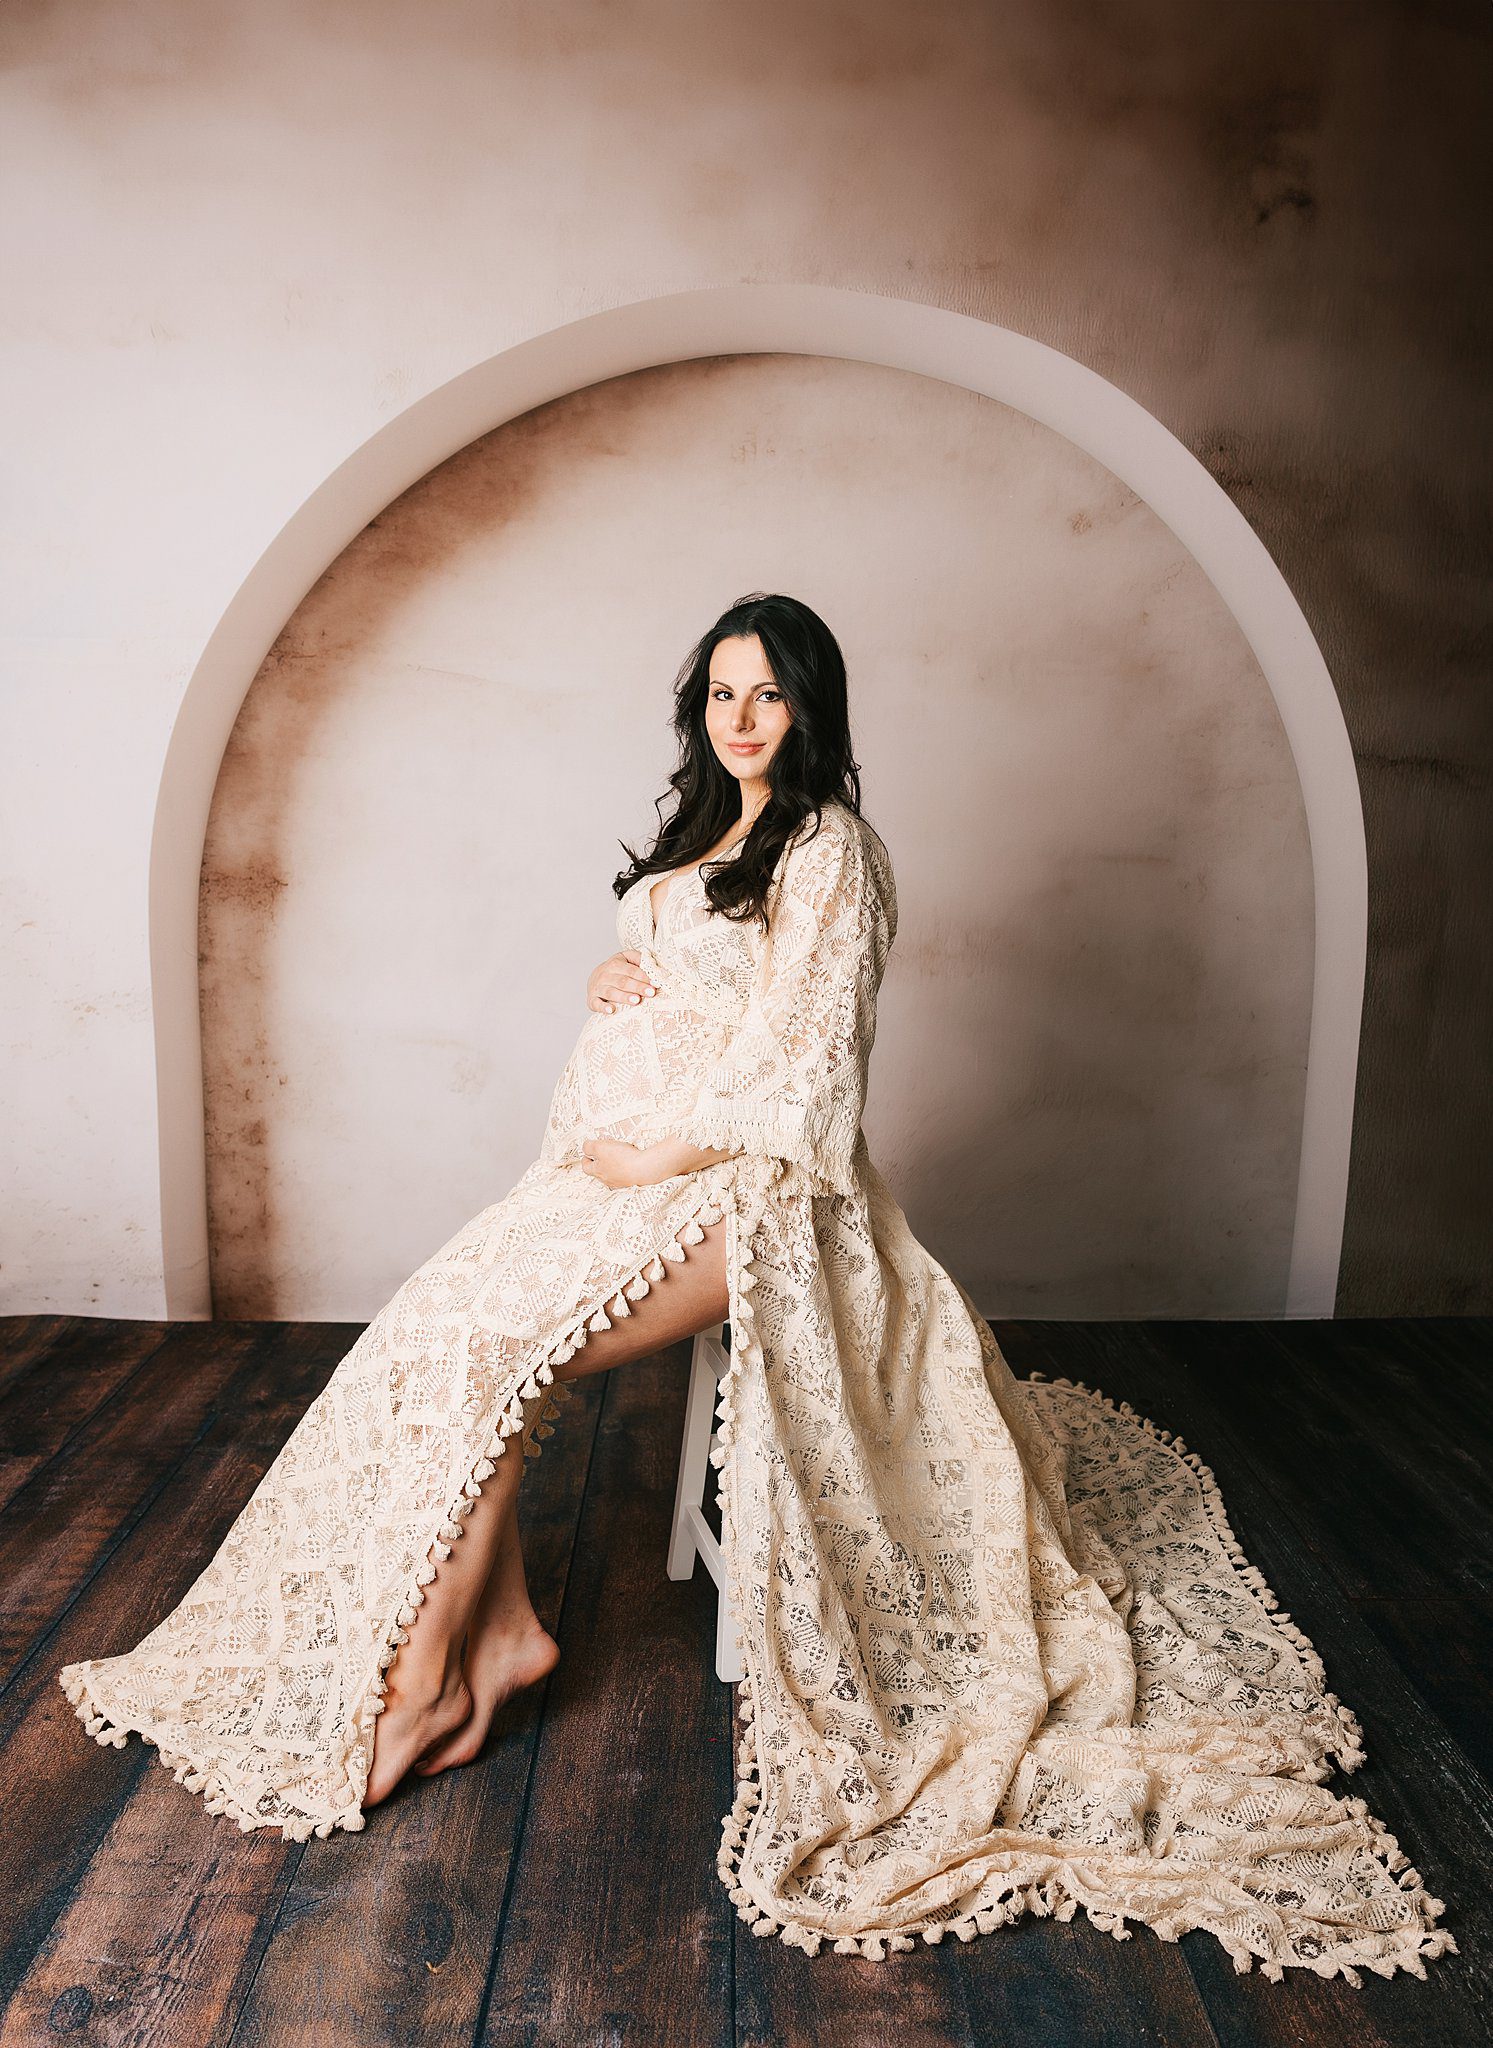 A pregnant woman in a long lace maternity gown sits on a stool in a studio under an arch